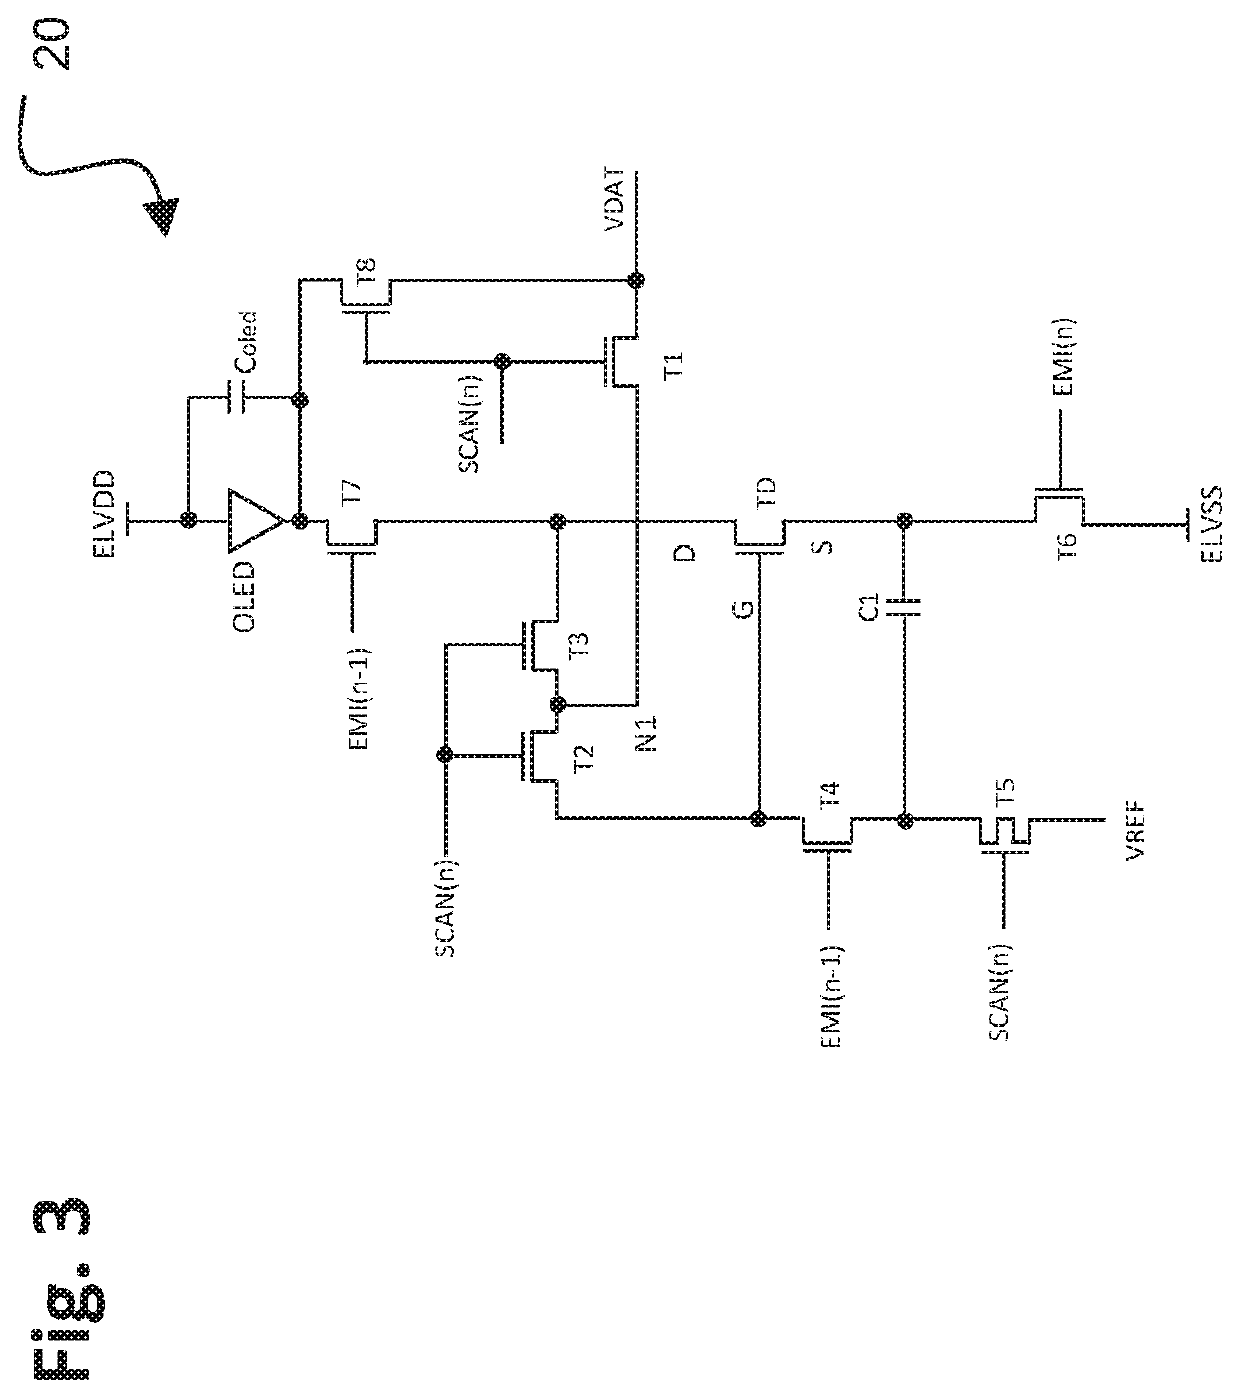 TFT pixel threshold voltage compensation circuit with data programming from drain of the drive TFT